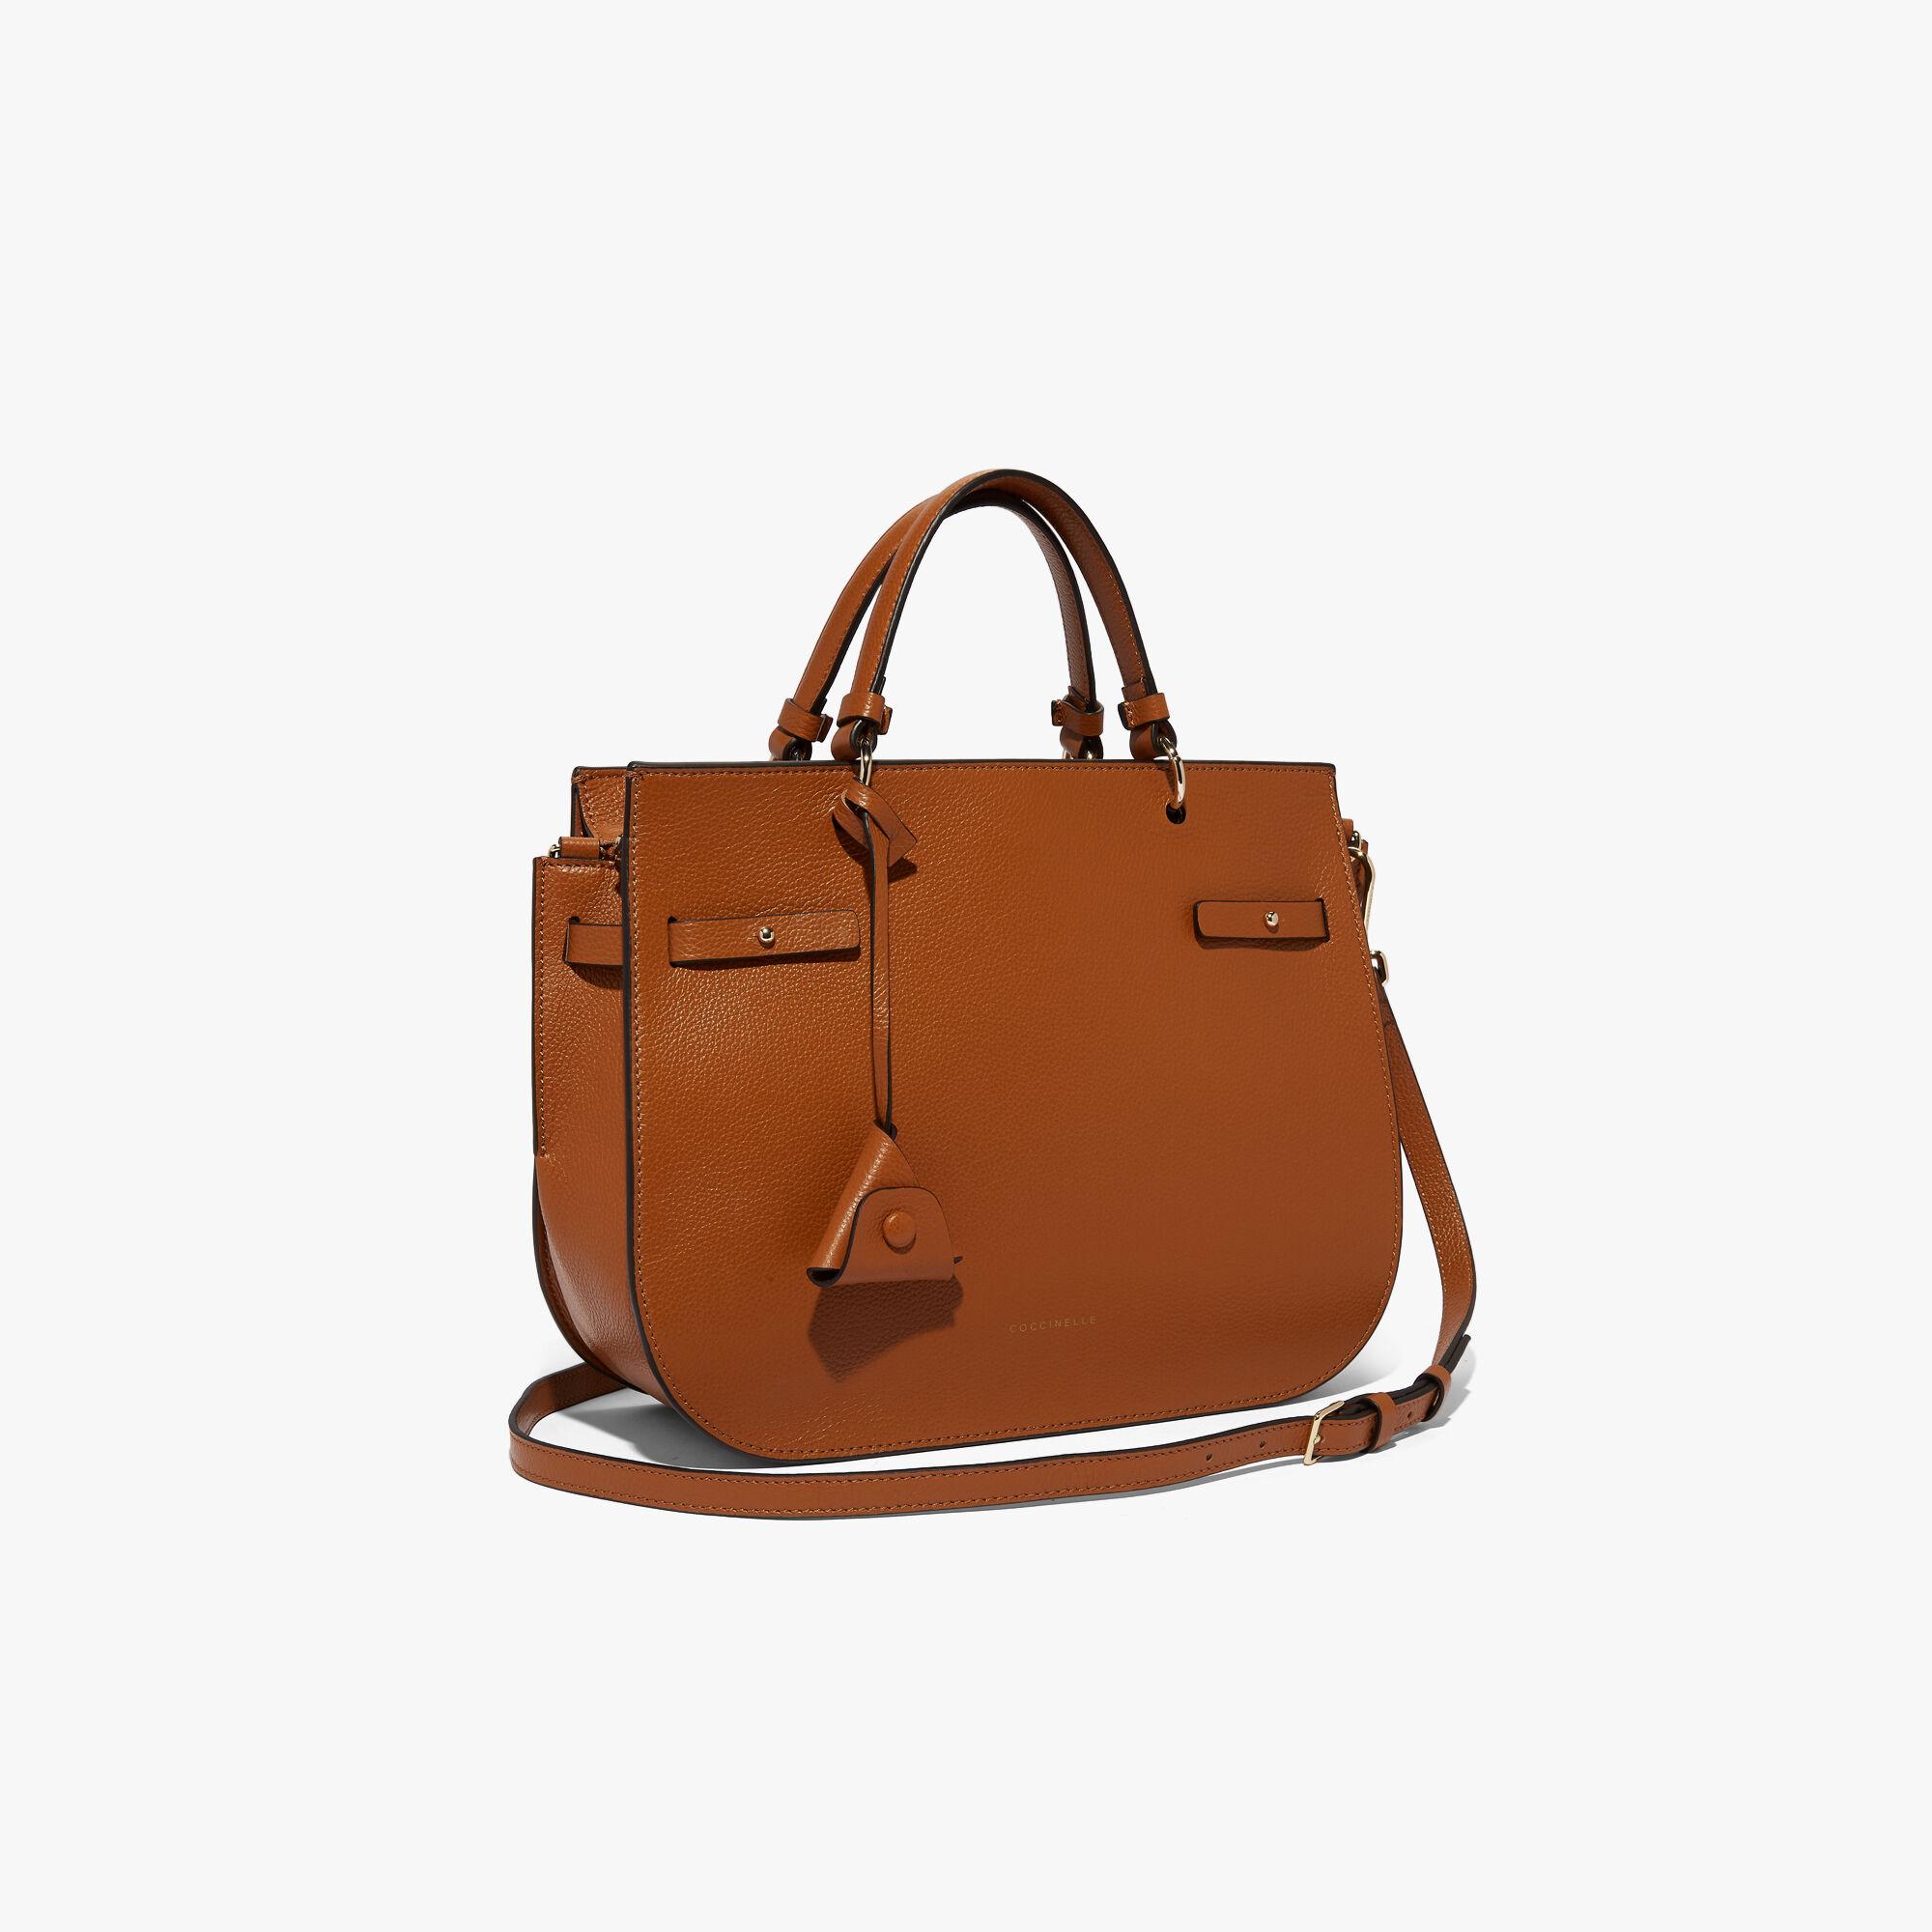 Coccinelle Didi Medium Caramel Tumbled Leather in Brown - Lyst